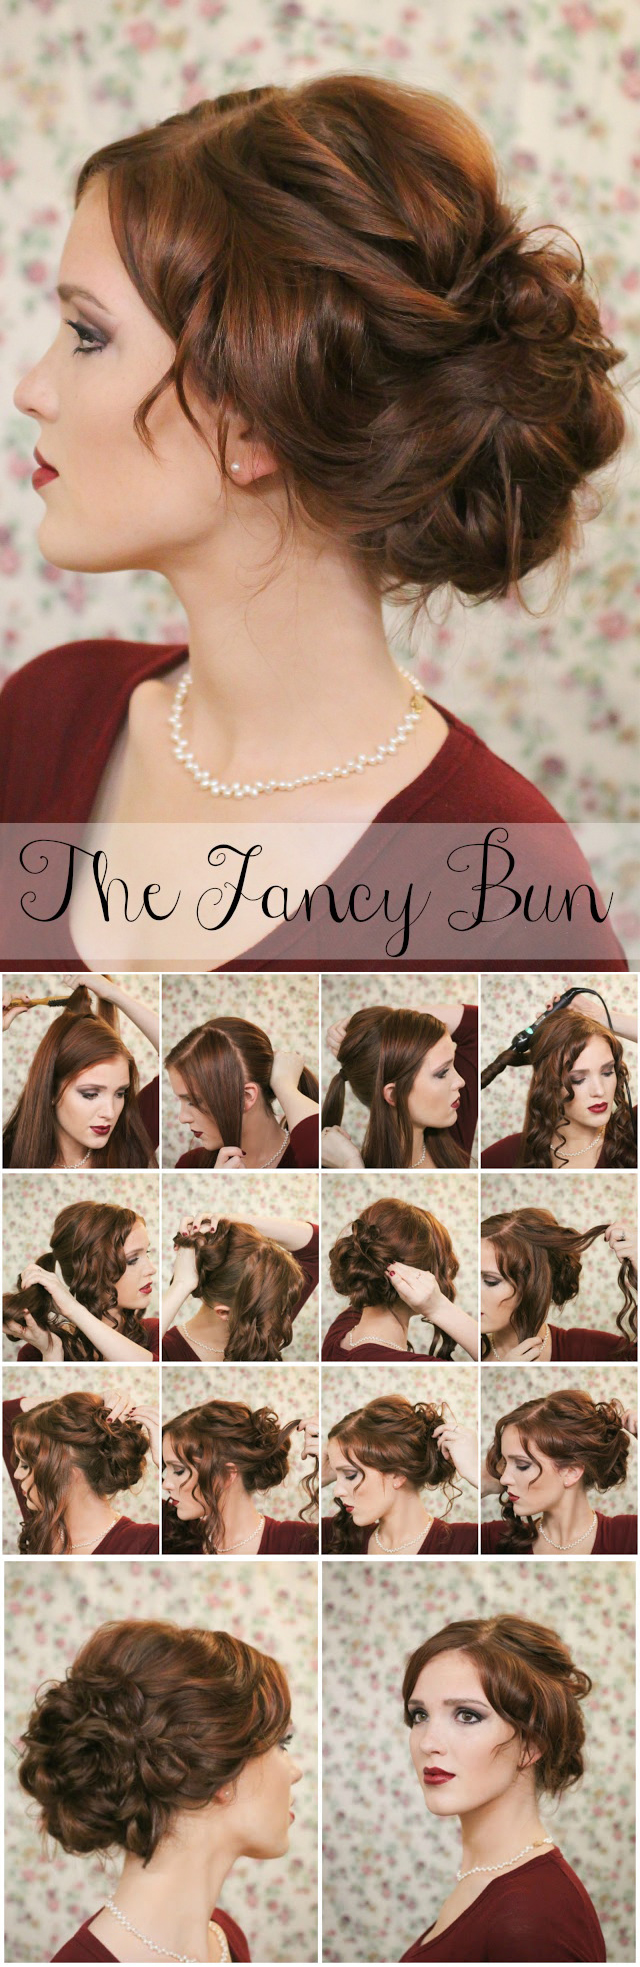 Super Easy Knotted Bun Updo and Simple Bun Hairstyle Tutorials ...